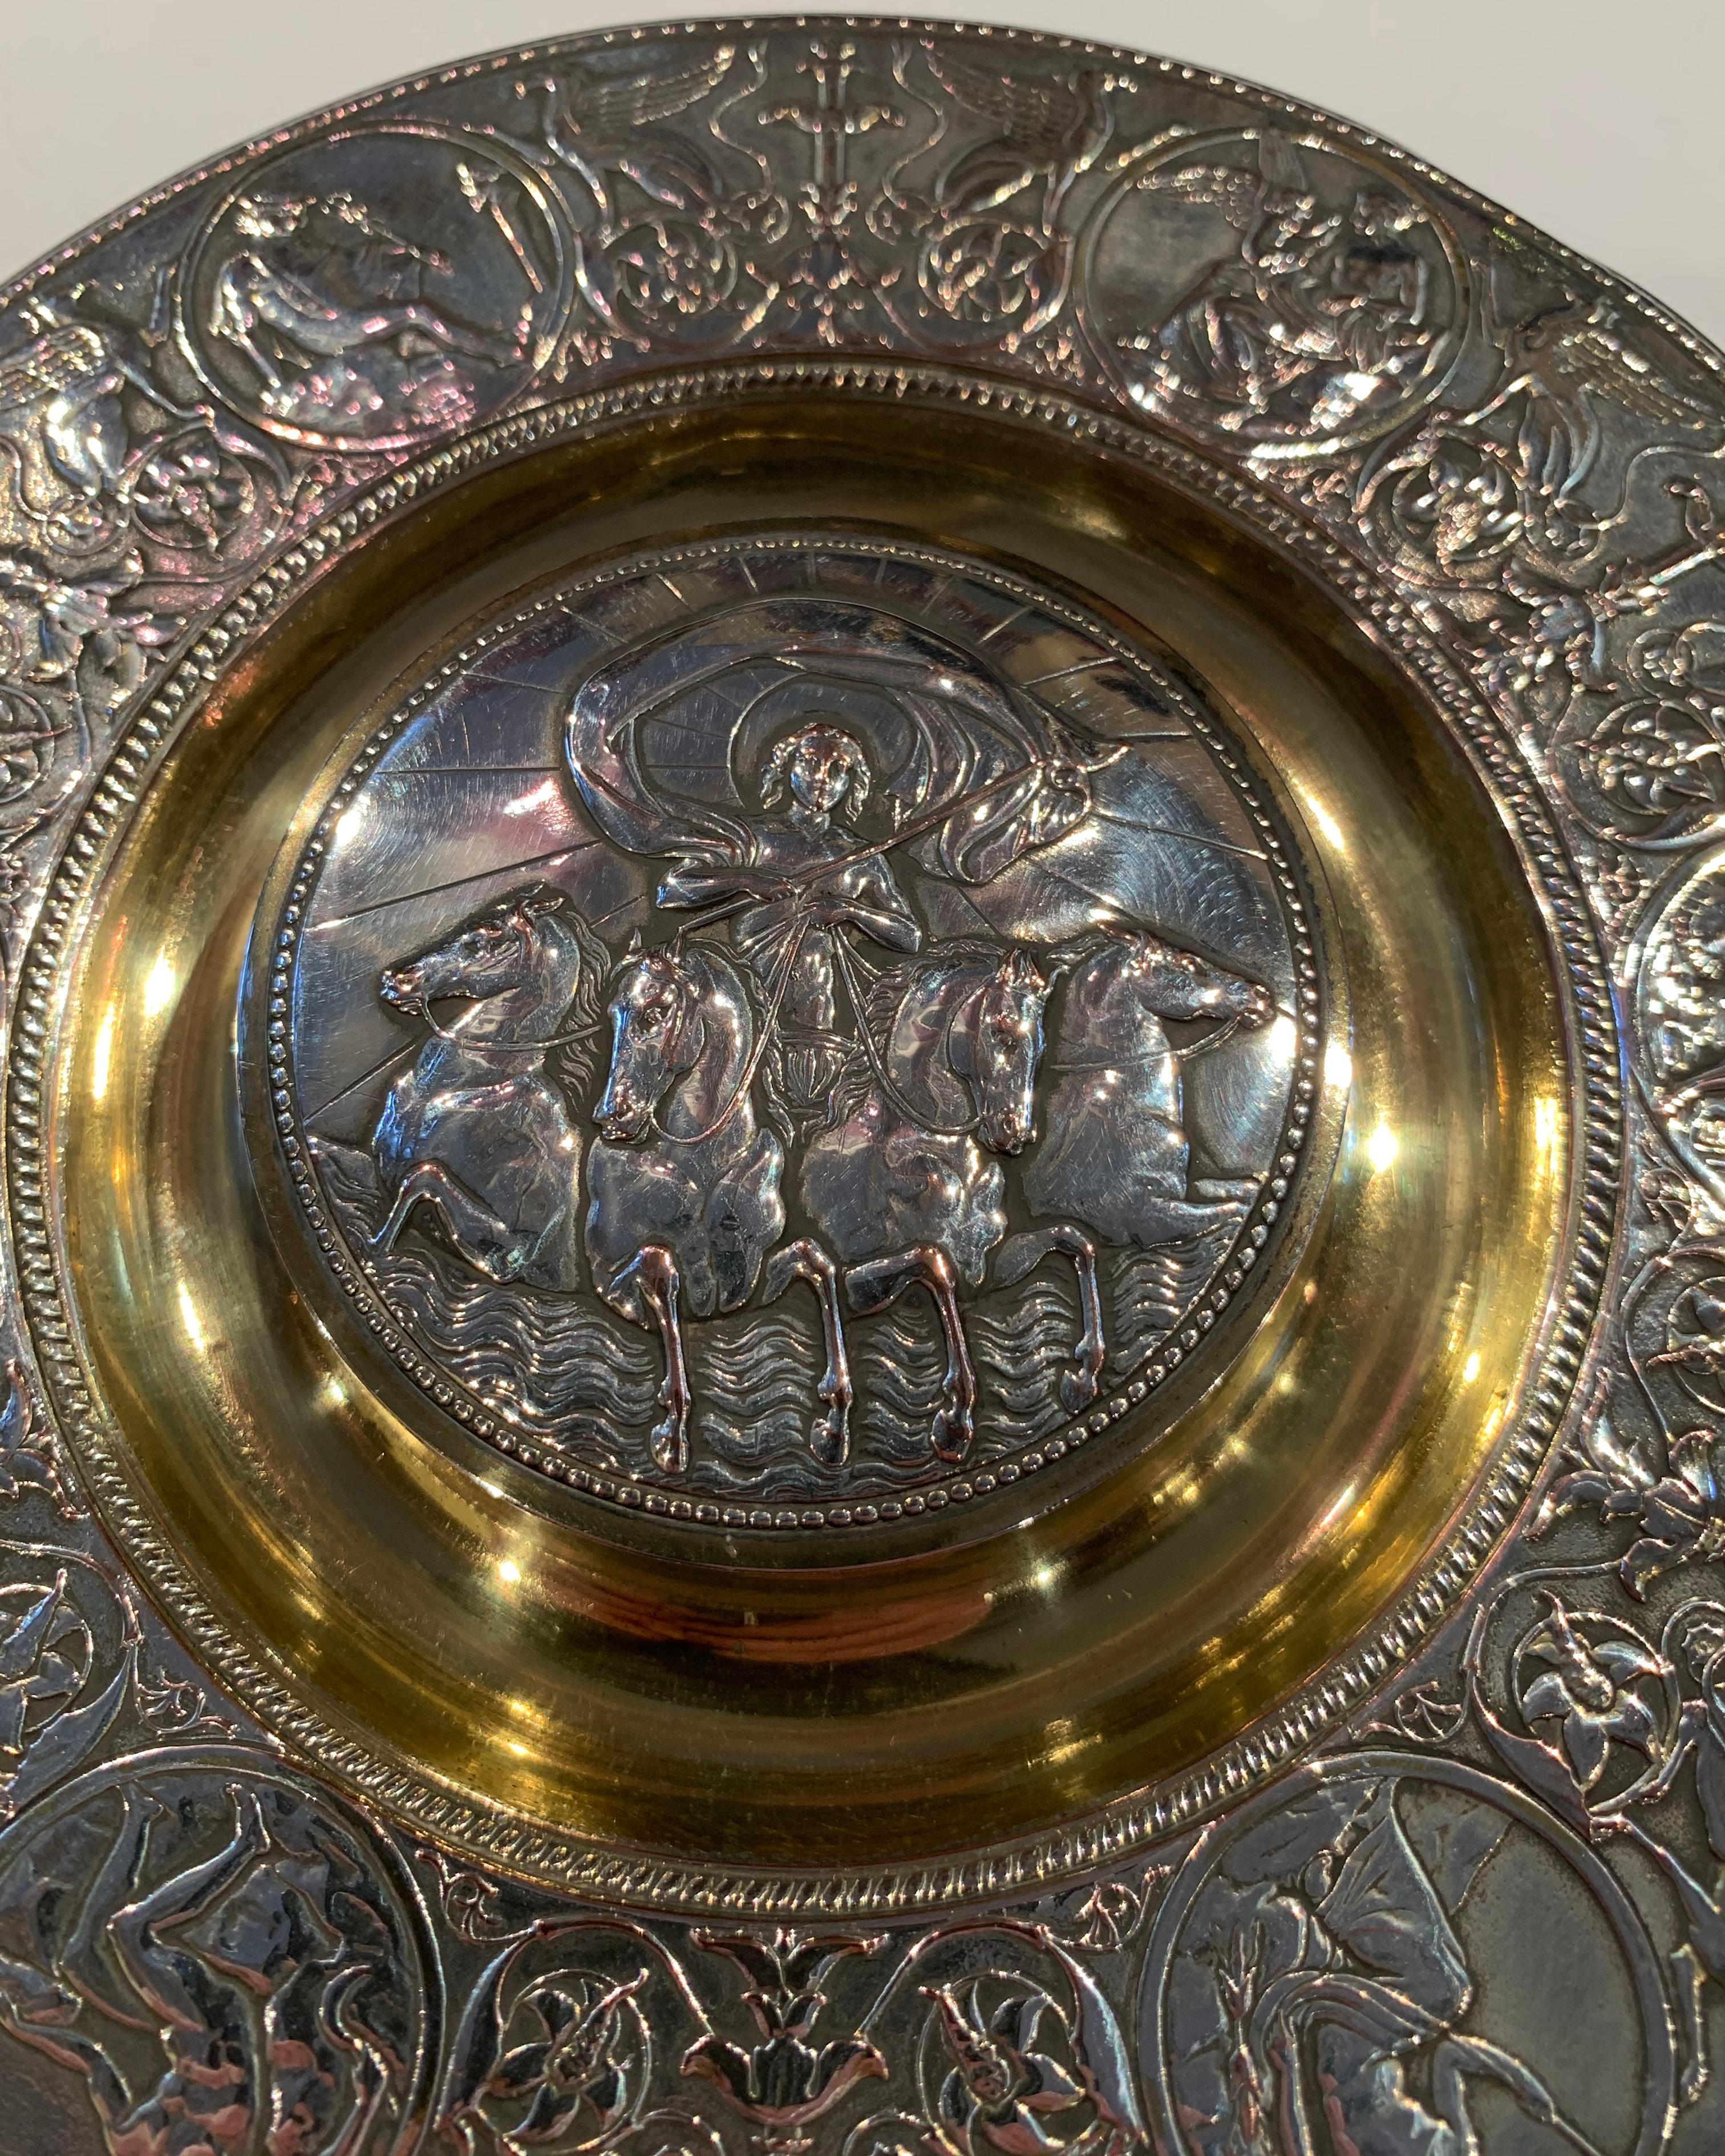 A delightful silver plate and gold wash Caviar dish by Elkington & Co circa 1890.

The lift up central lid, depicting Boadicea on her Chariot. The surrounding edge depicting classical scenes, figures and griffins.

It really is a very nice